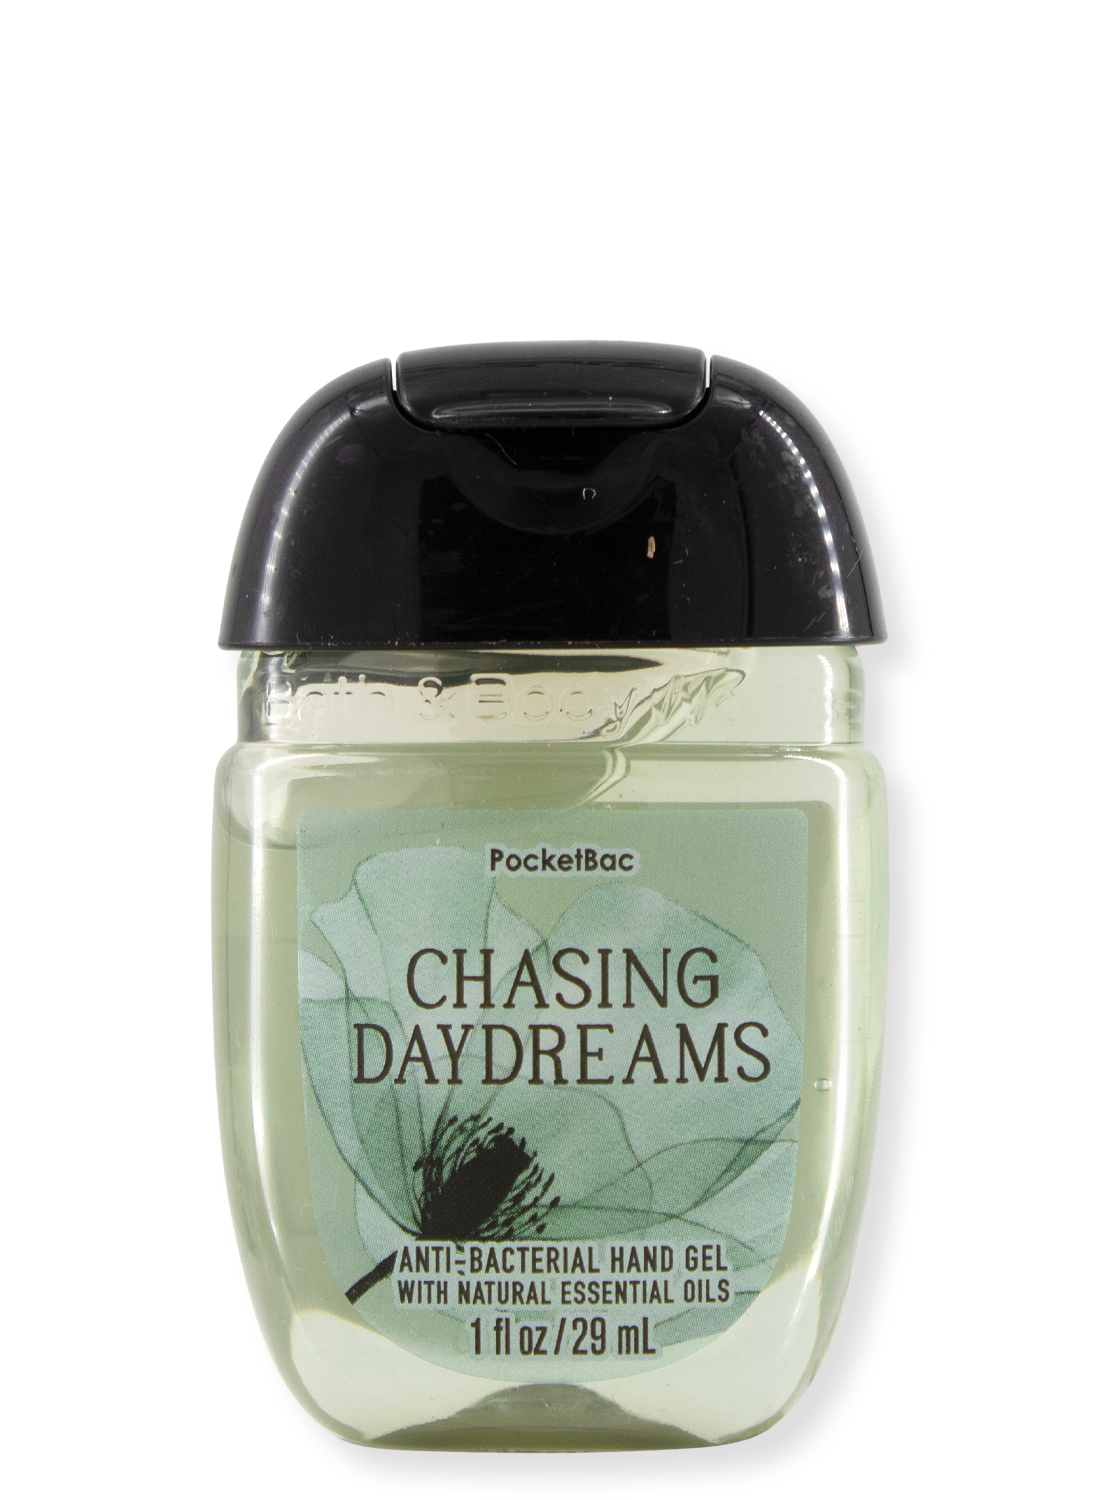 Hand disinfection gel - Chasing Daydreams - 29ml